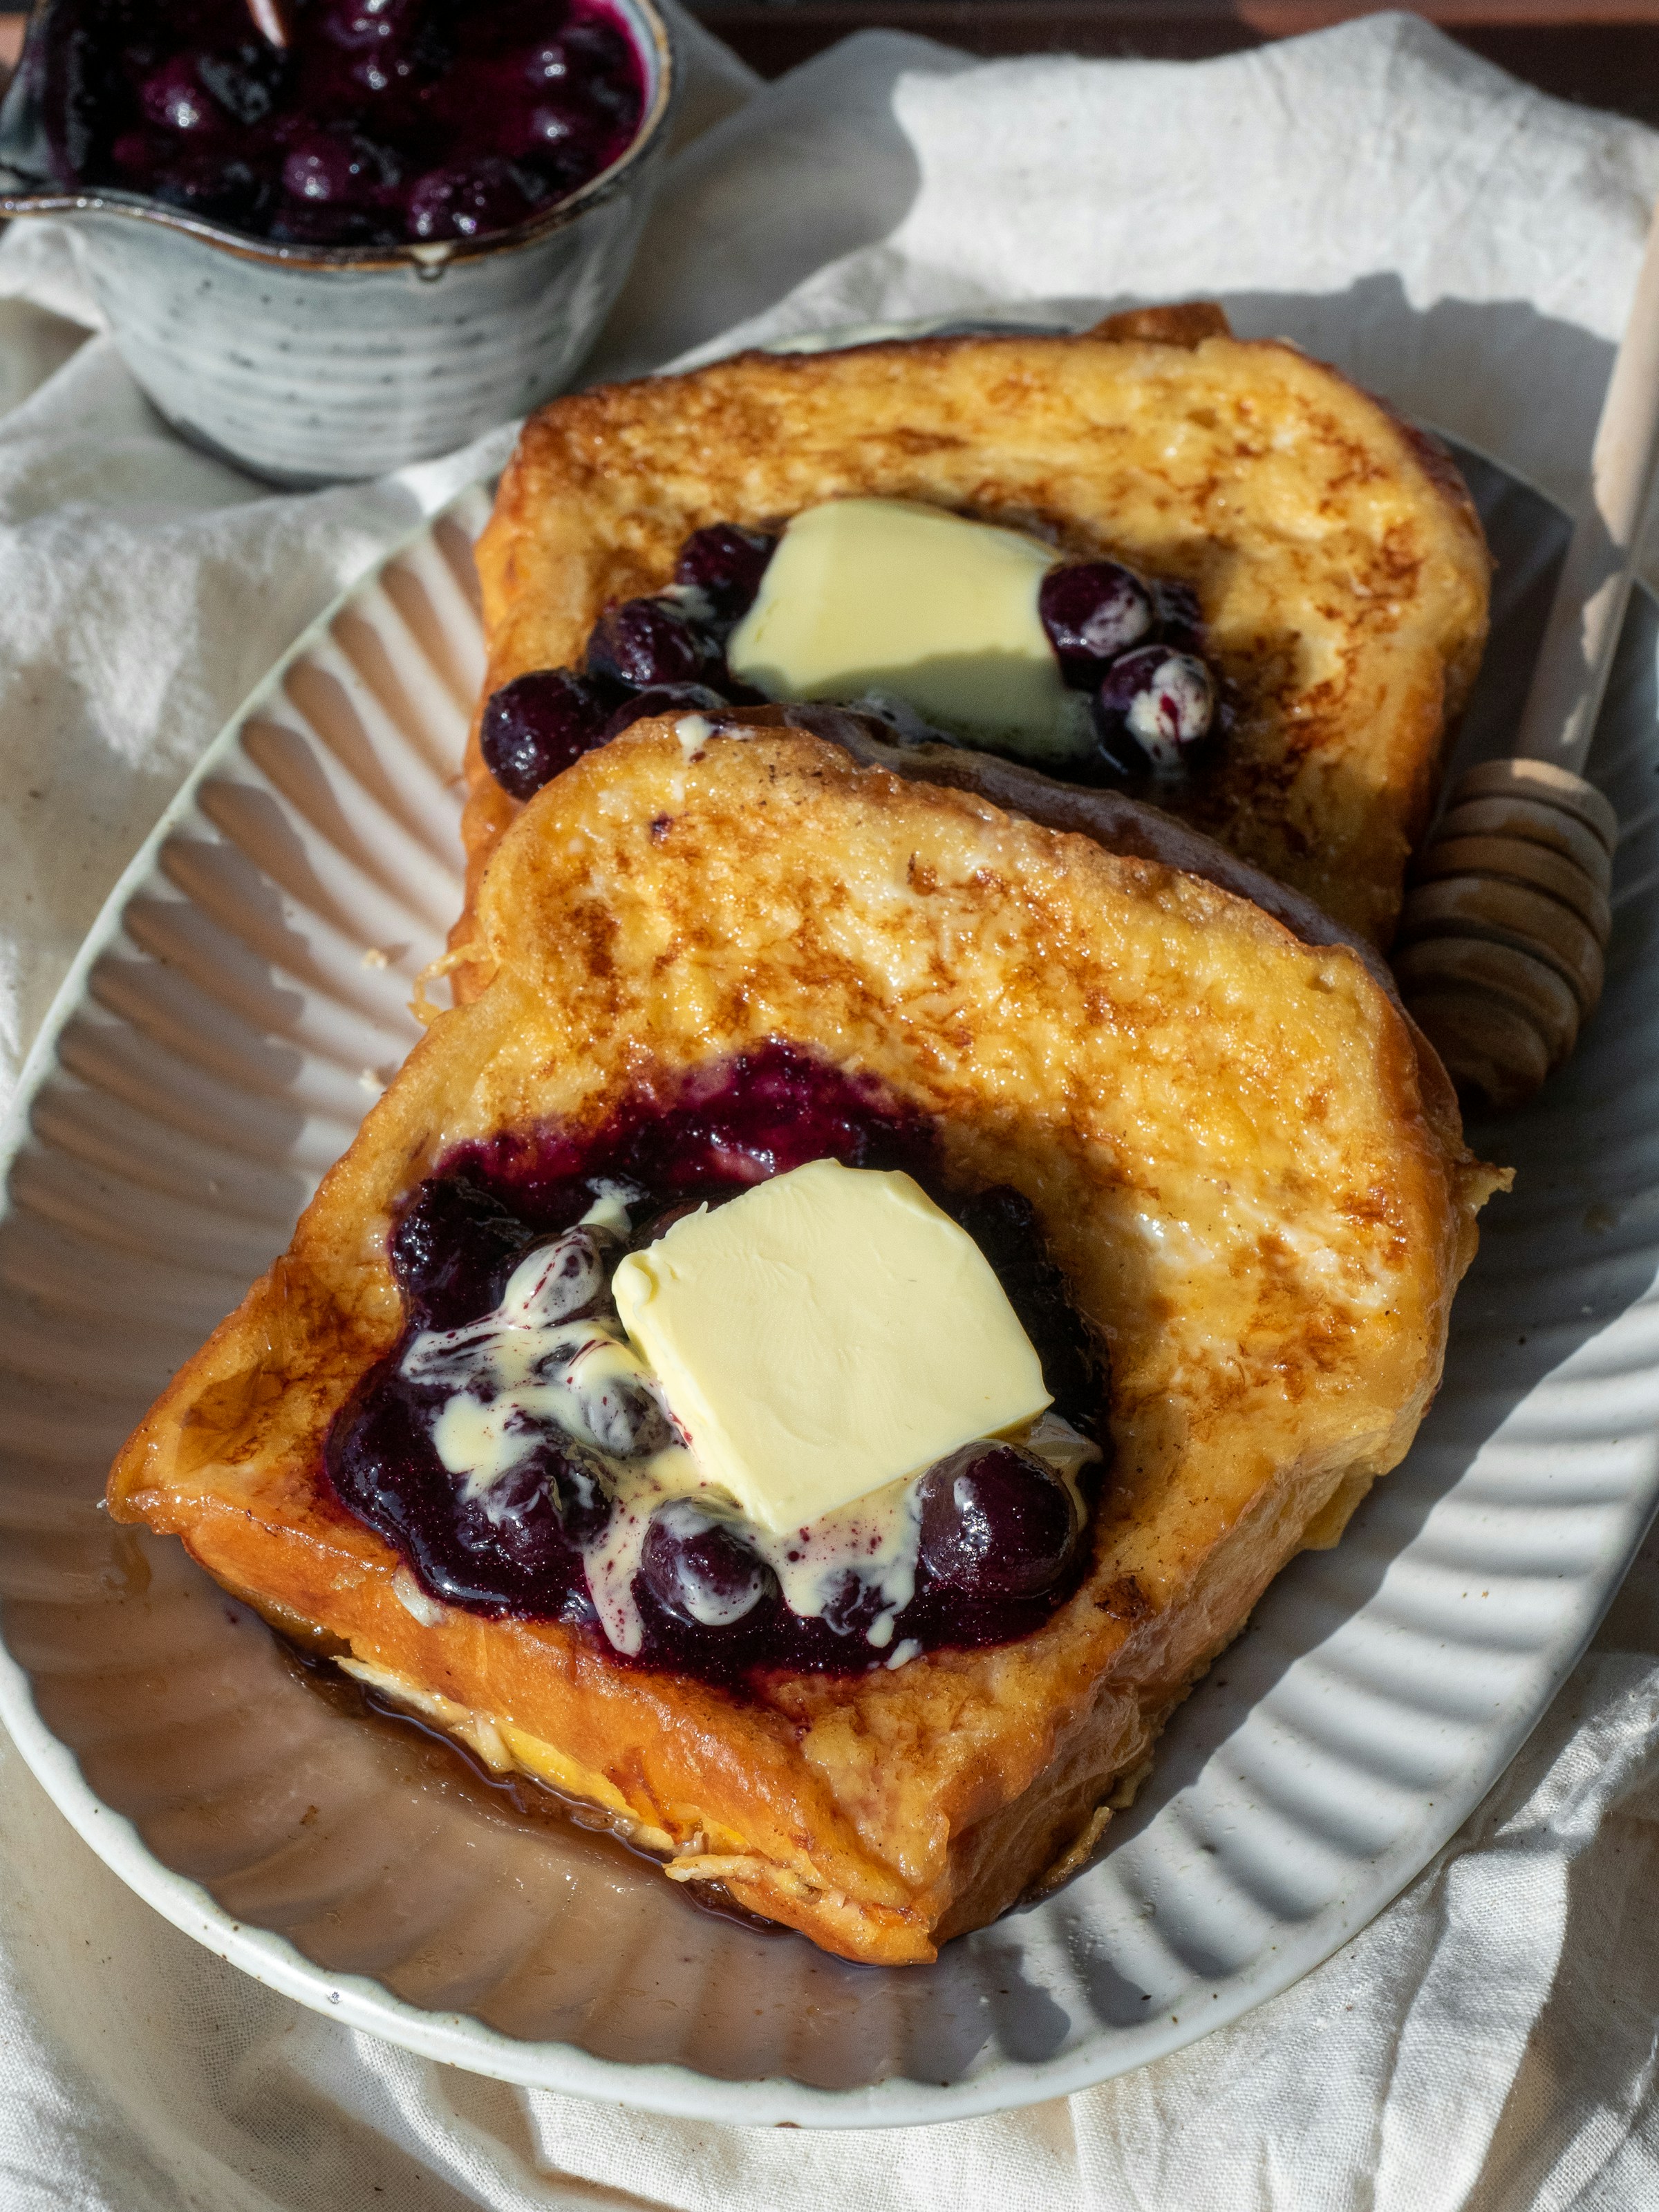 Buttered toast with jam | Source: Unsplash